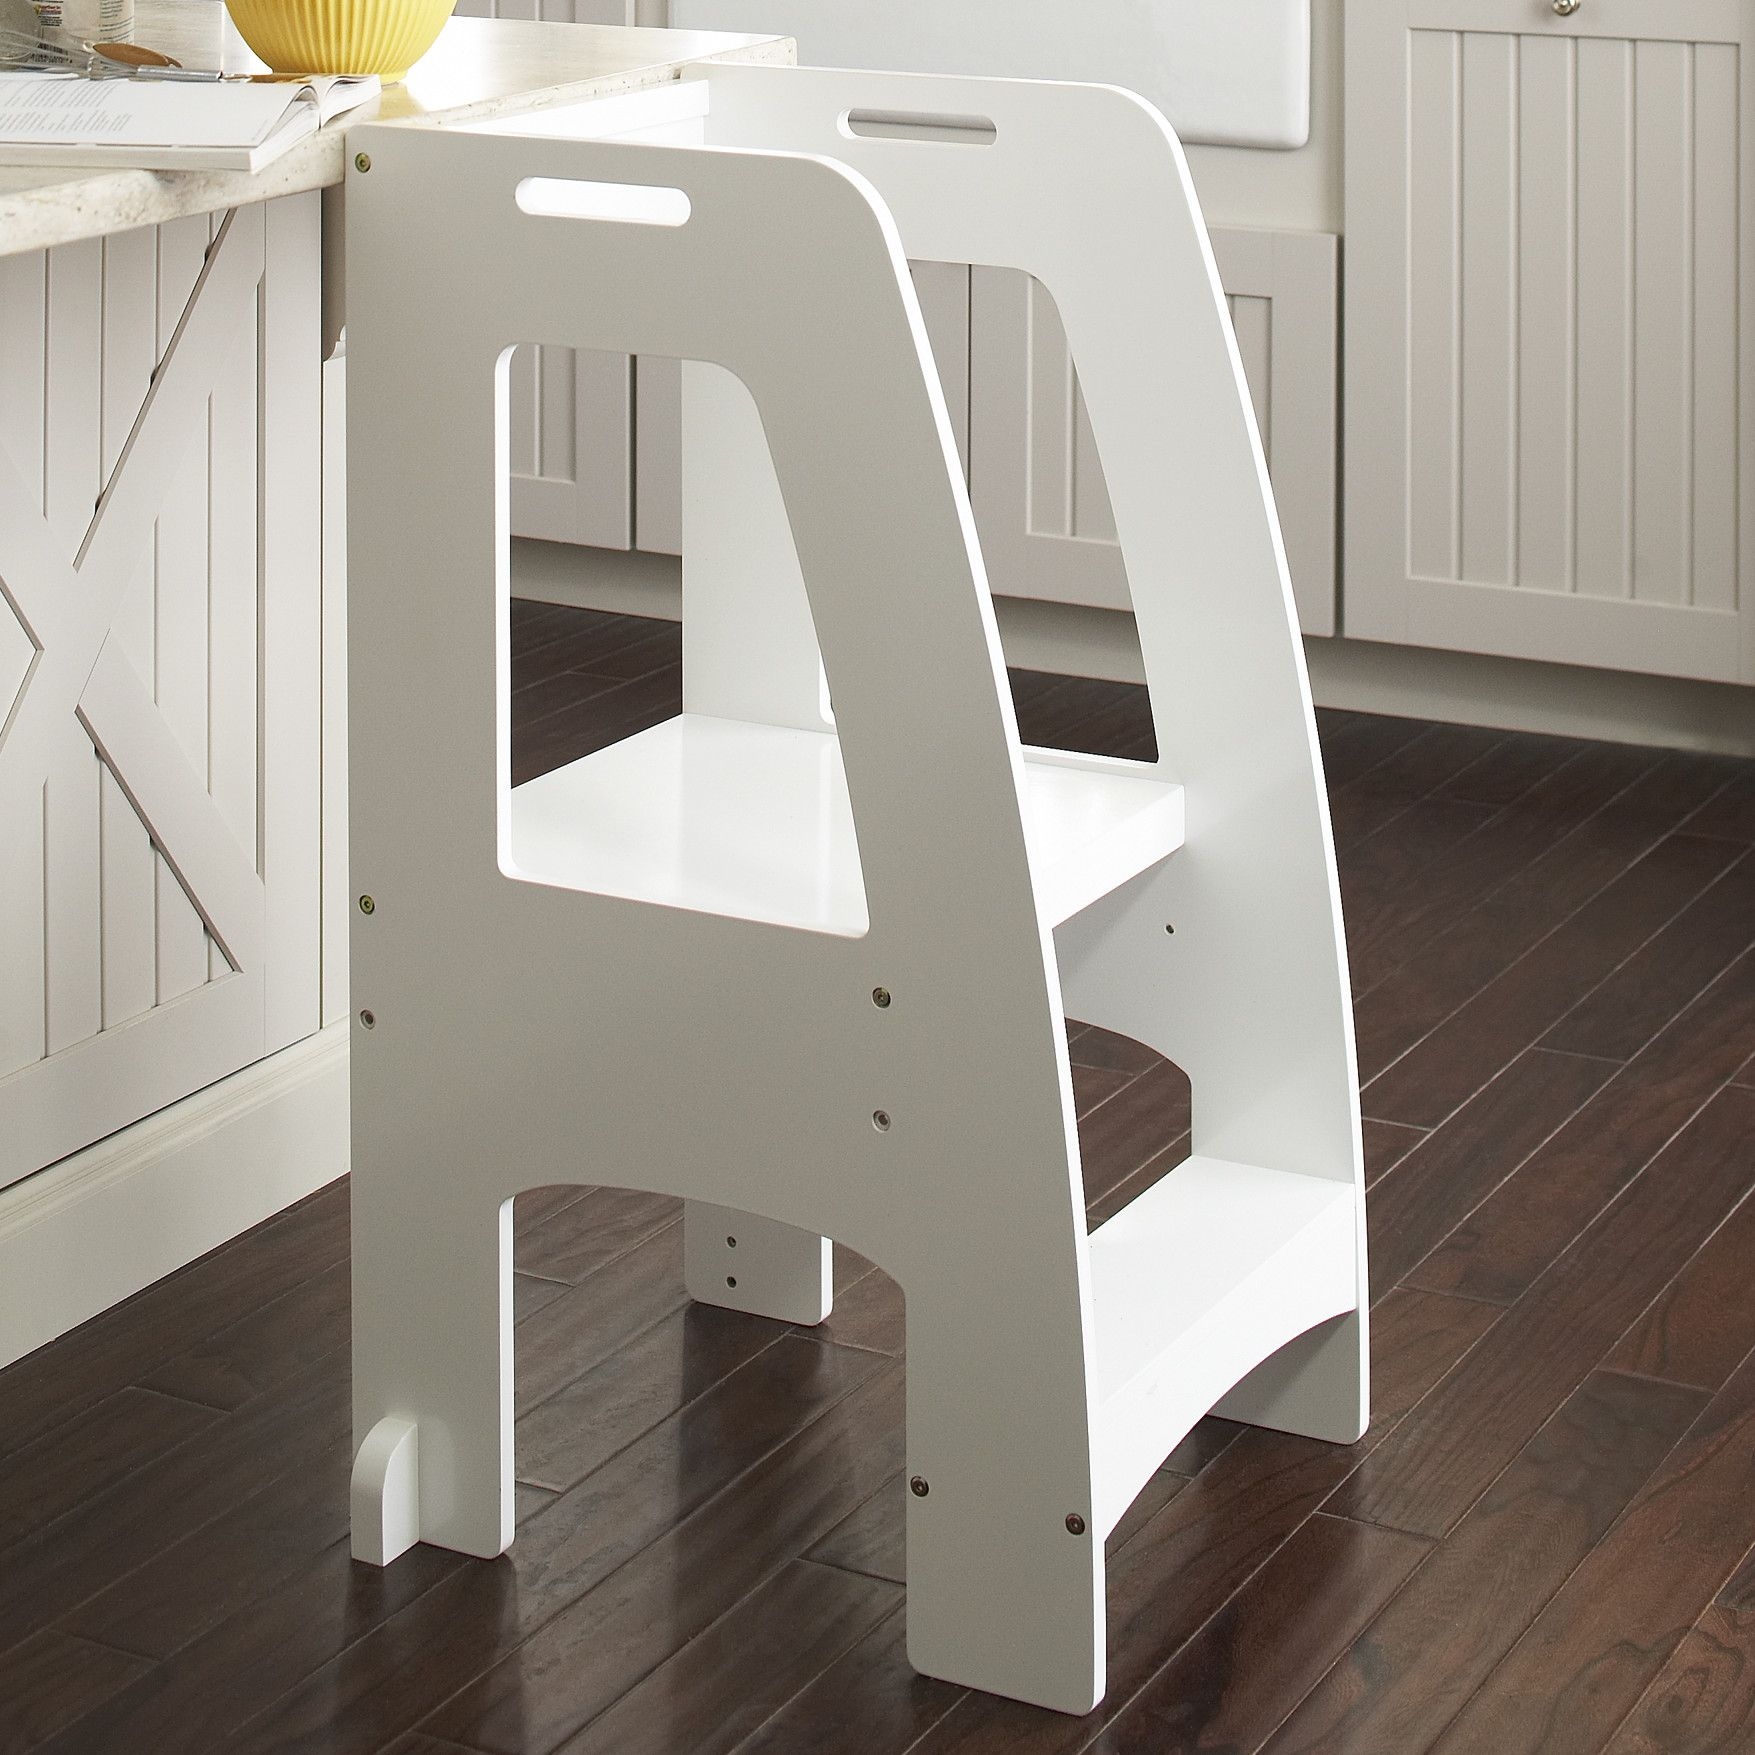 Step Stool Wood Holds Up to 400 LBS- Ebony Solid Kitchen Step Stool by ECROCY Need Assemble